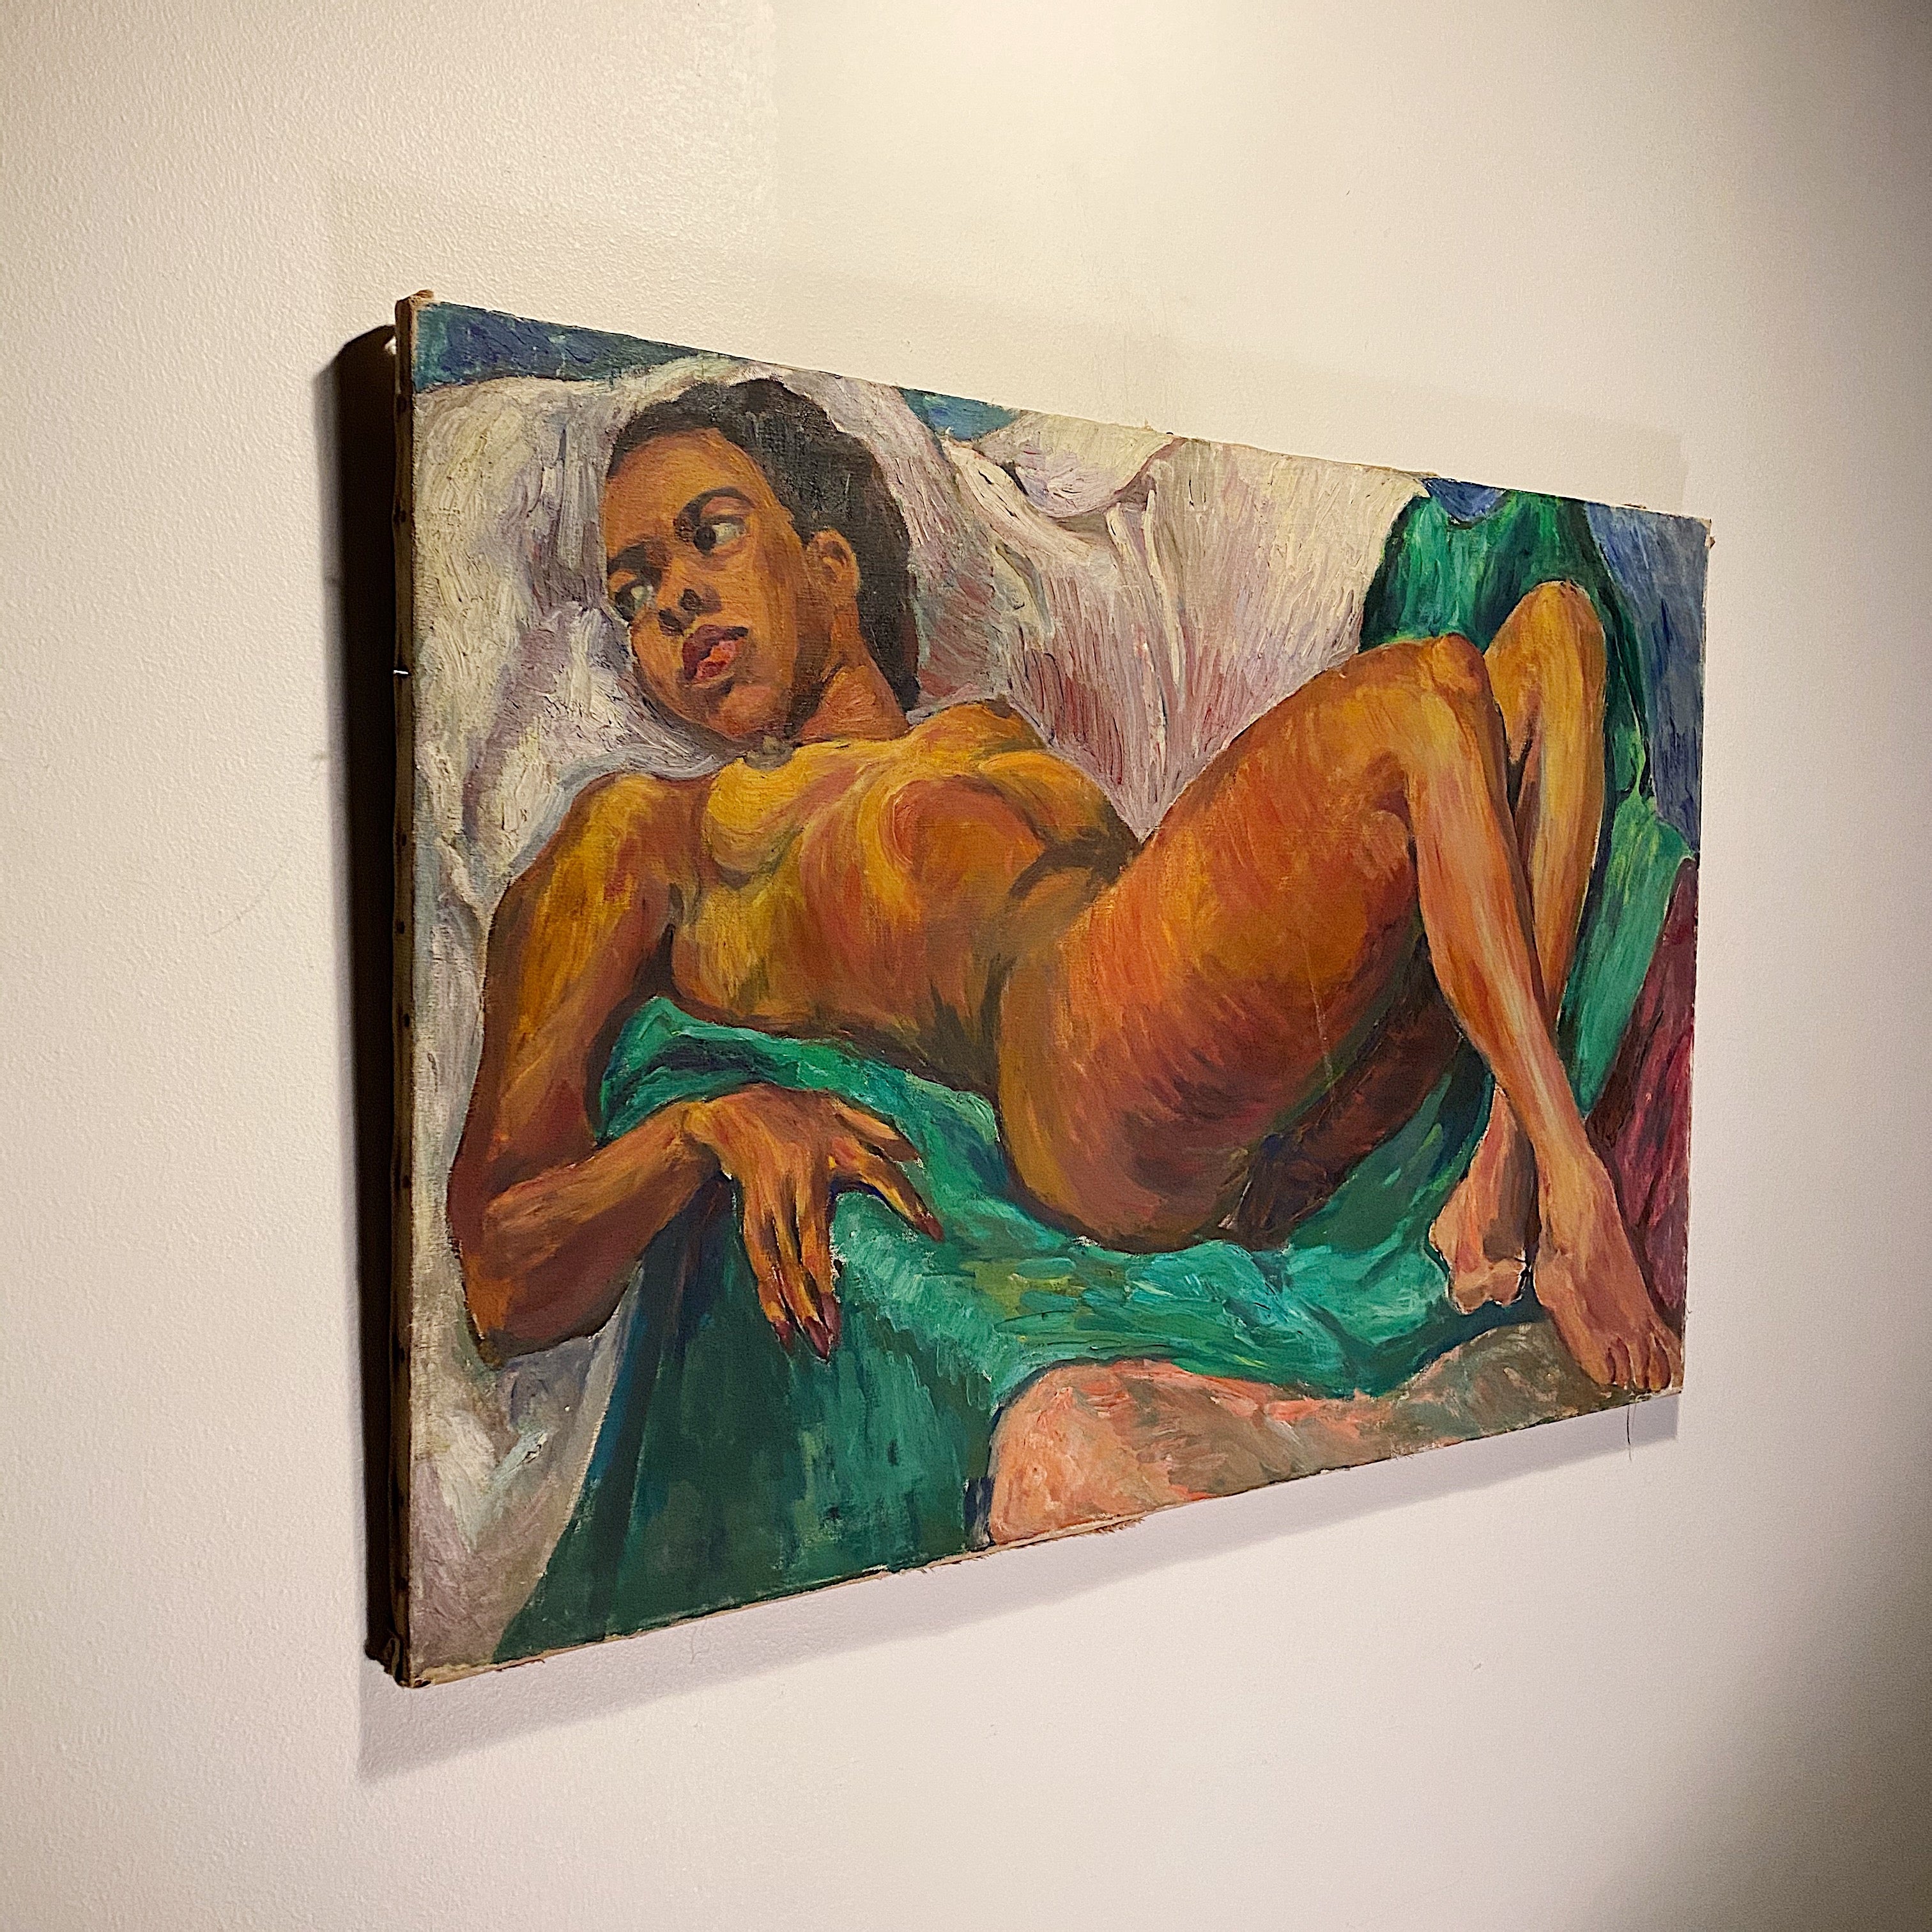 Chicago Artist WPA Era Painting of African American Nude Woman by Lillian Jean Nosko - 1940s Chicago Institute of Art - Midcentury Artwork - Listed Artist